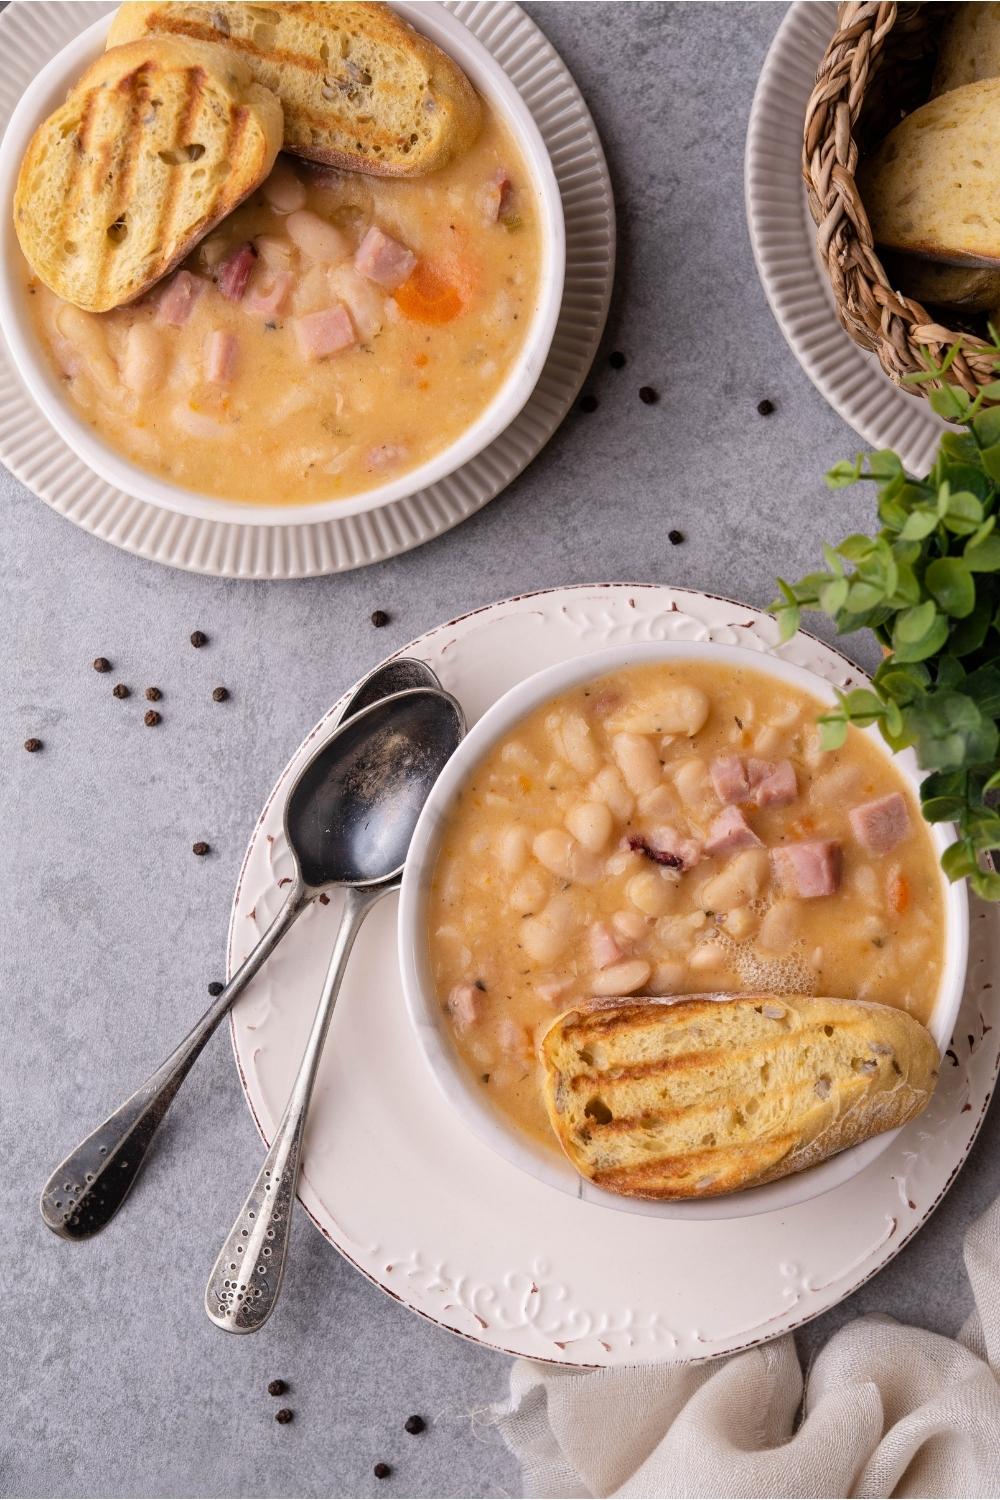 Two bowls of ham and beans soup, each topped with toasted bread. Two spoons lay next to one of the bowls of soup.